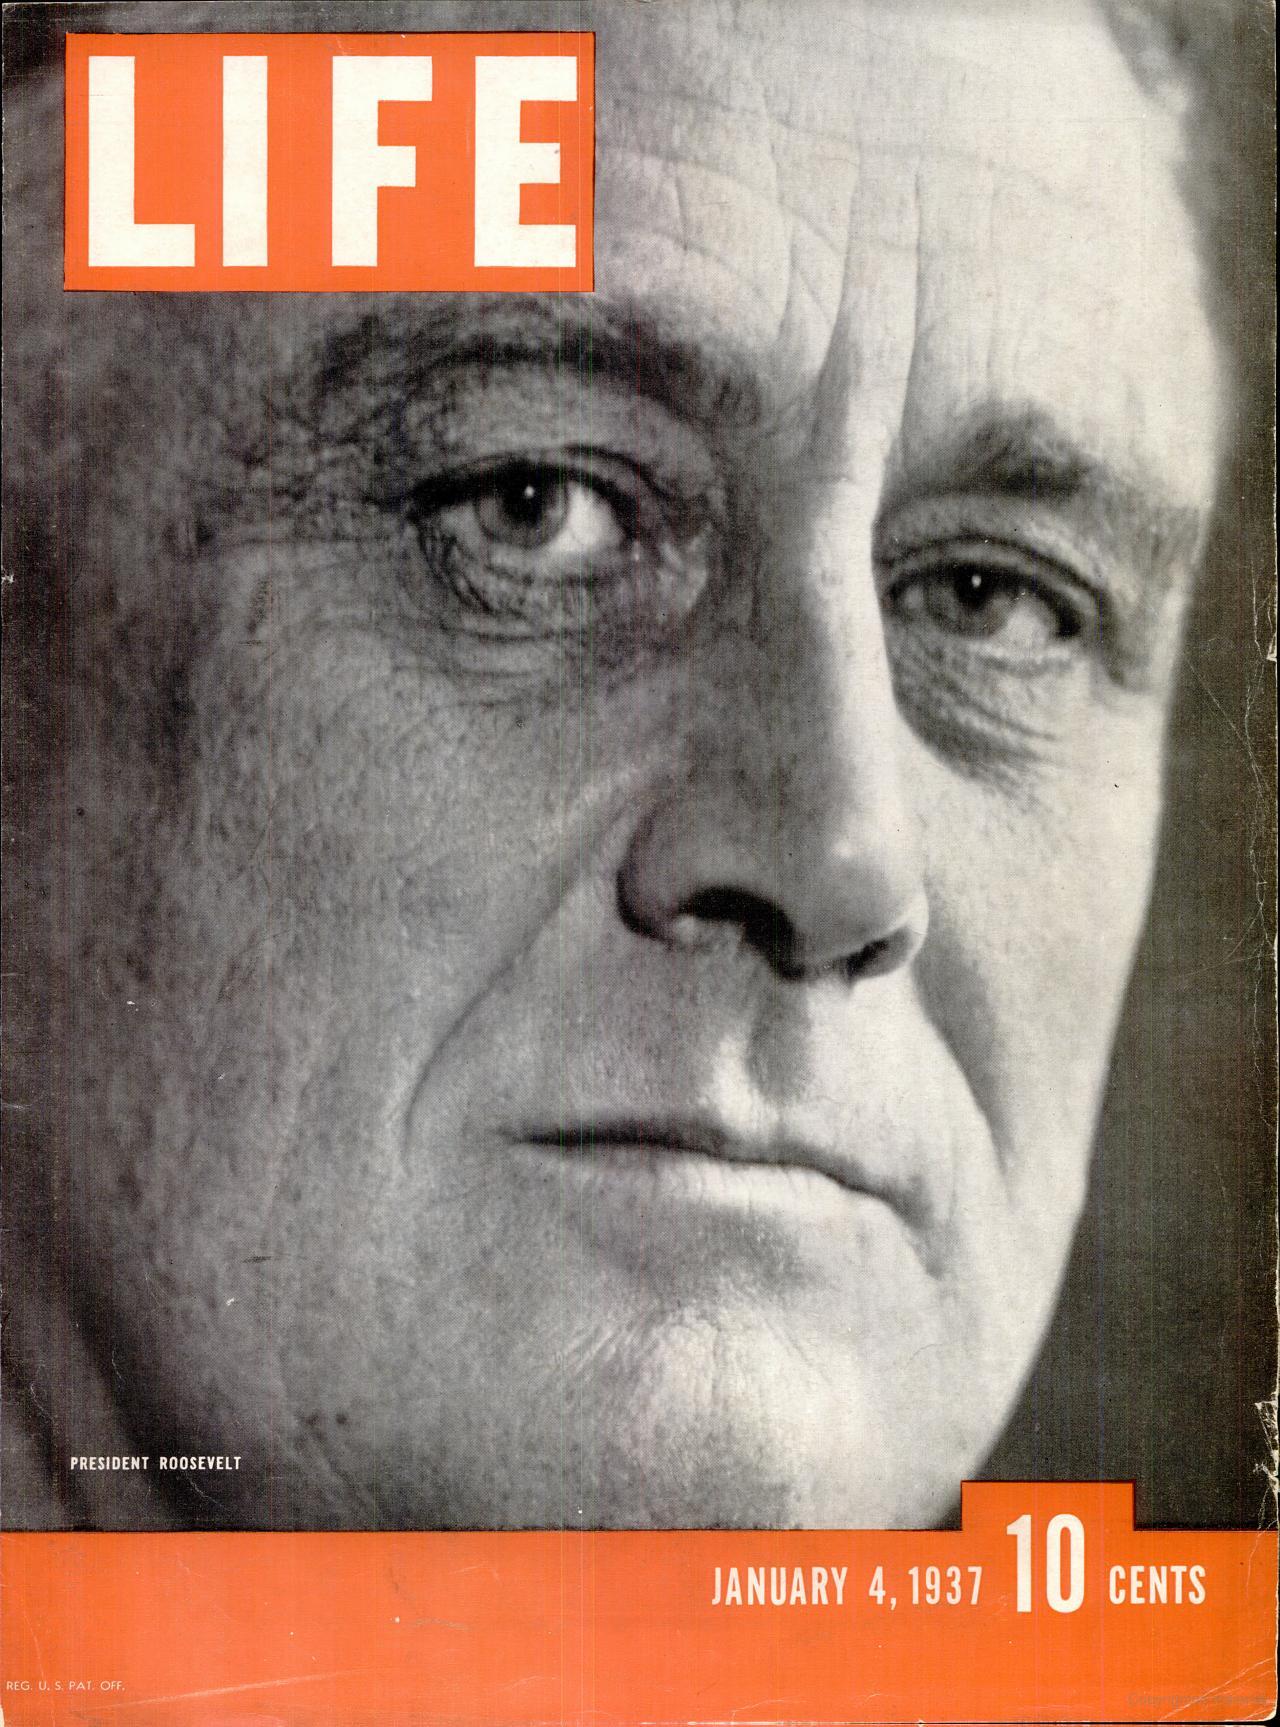 FDR on LIFE cover 1937